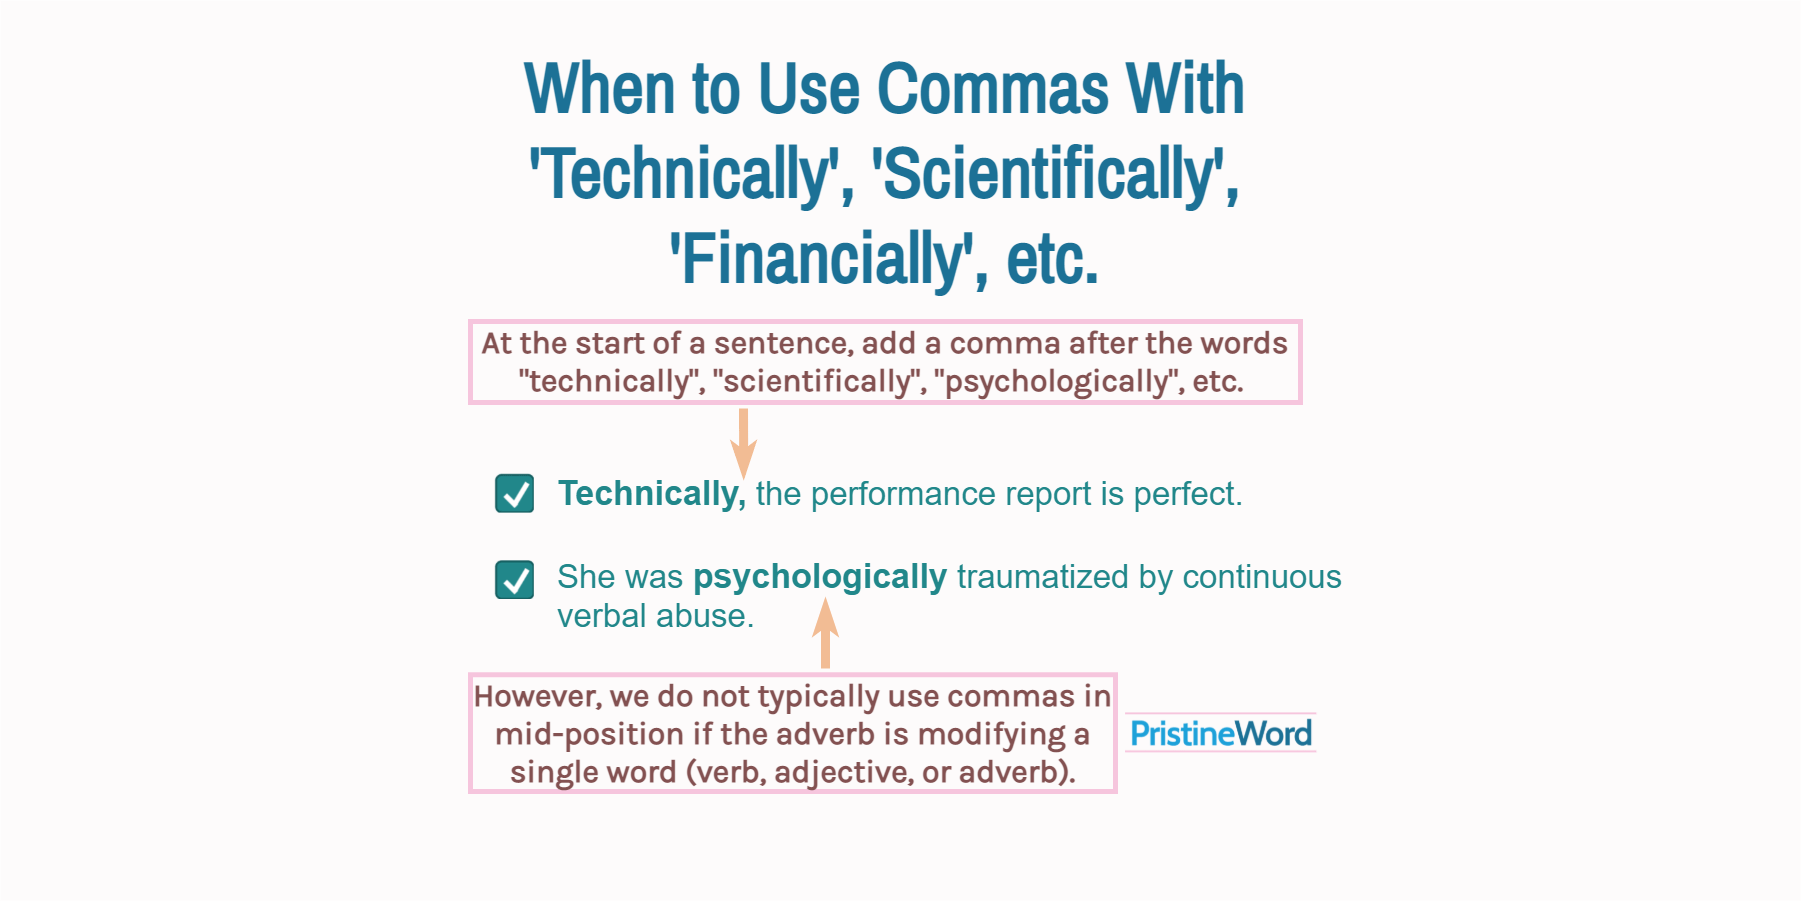 When to Use Commas After 'Technically', 'Scientifically', 'Financially', etc.